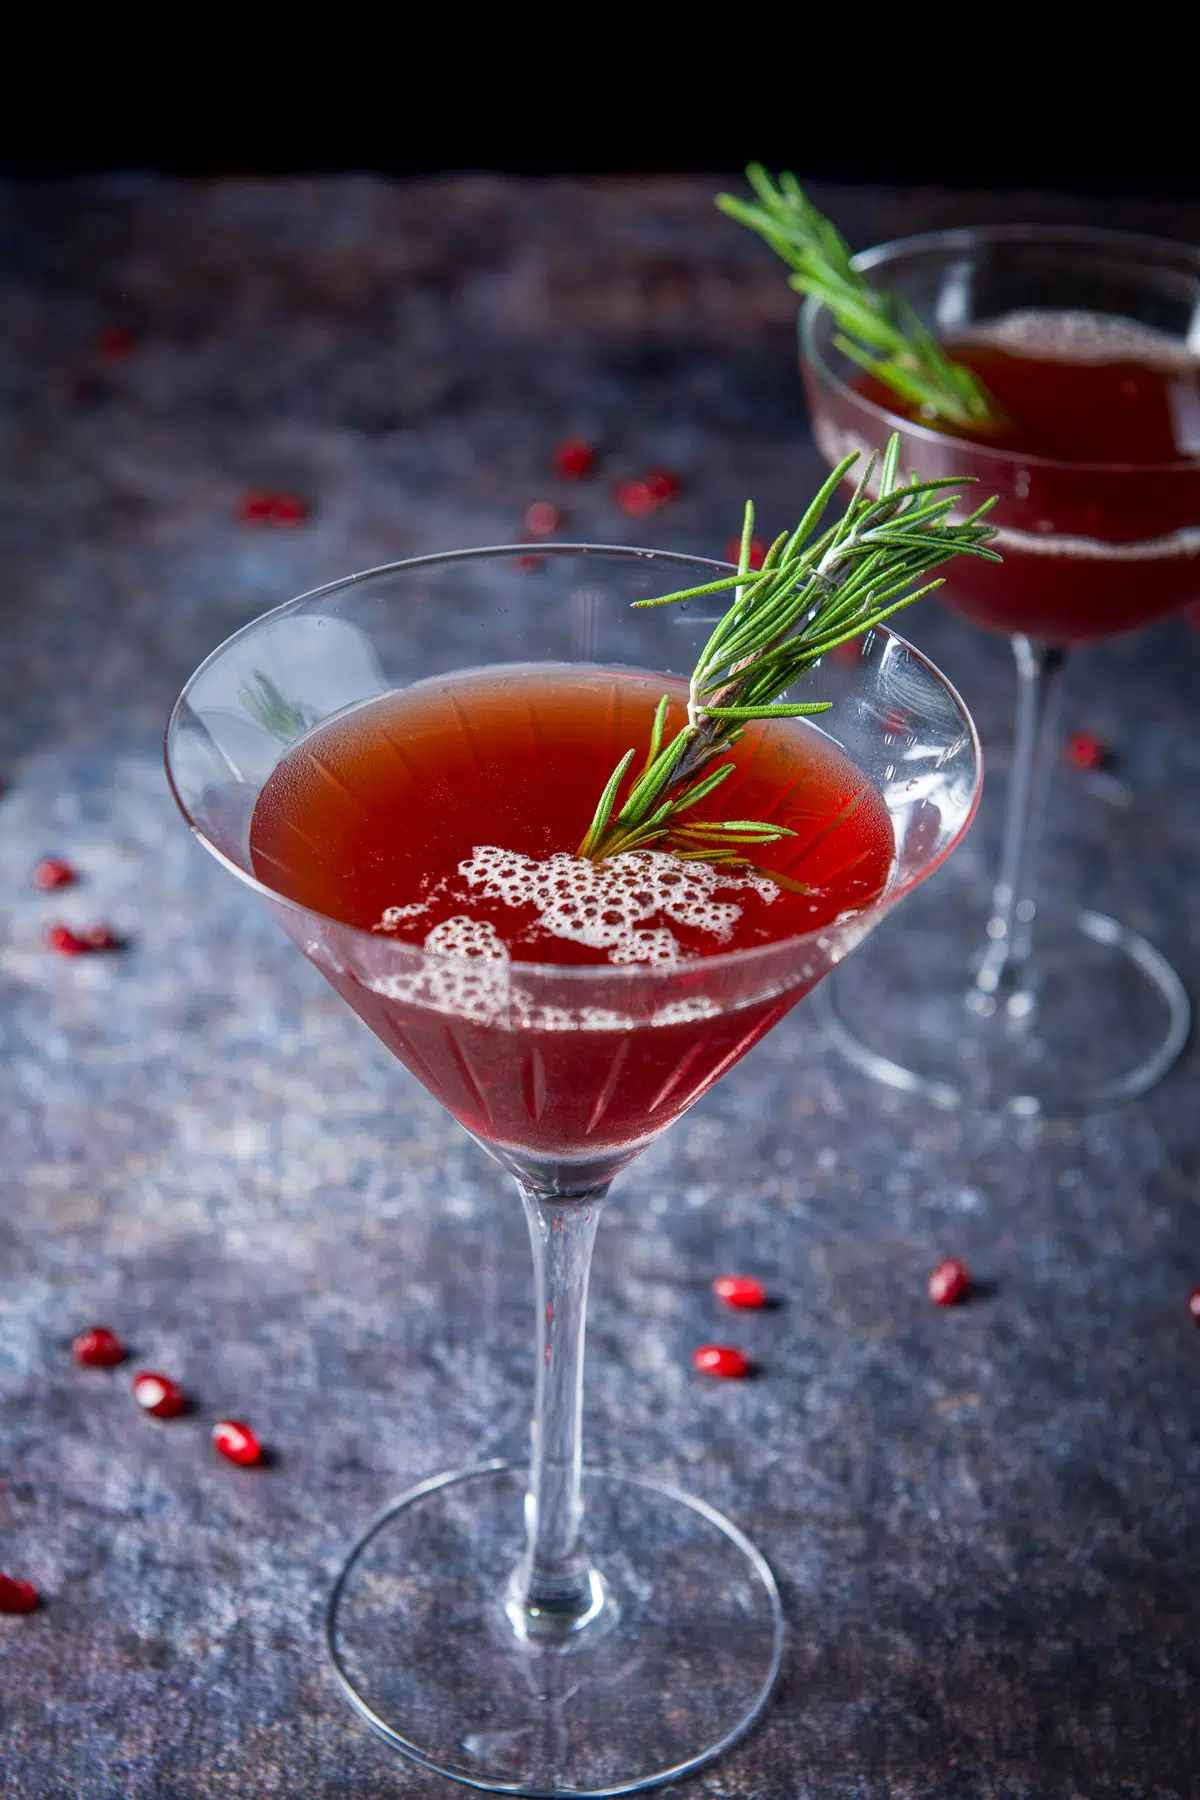 Fluted glass filled with the manhattan with a sprig of rosemary and pomegranate seeds on the table